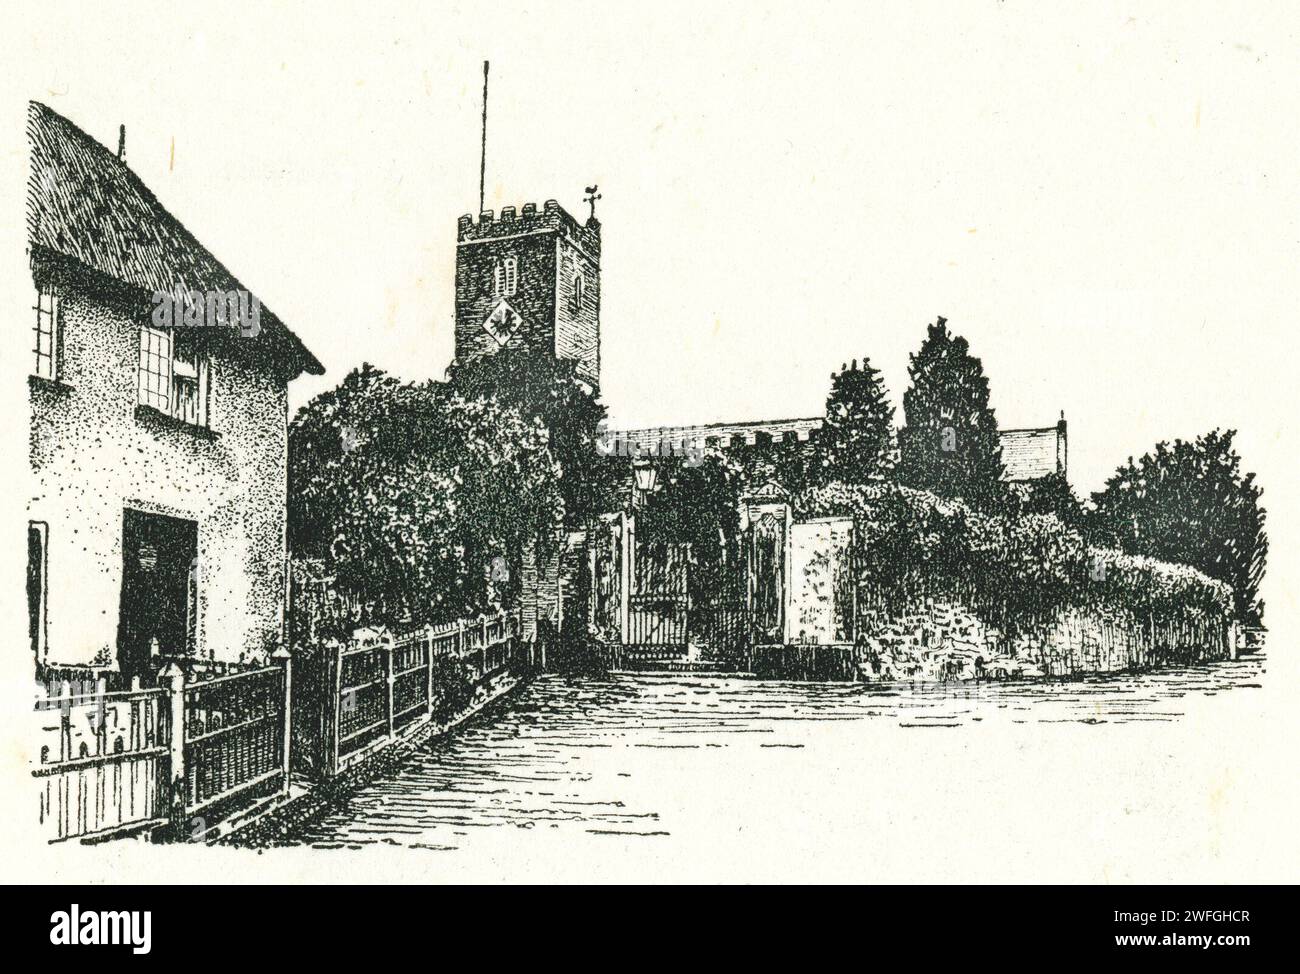 Pen and ink drawing of All Saint's Church, in the beautiful viilage of East Budleigh, Devon. Illustration from the book Glorious Devon.  by S.P.B. Mais, published by London Great Western Railway Company, 1928 Stock Photo